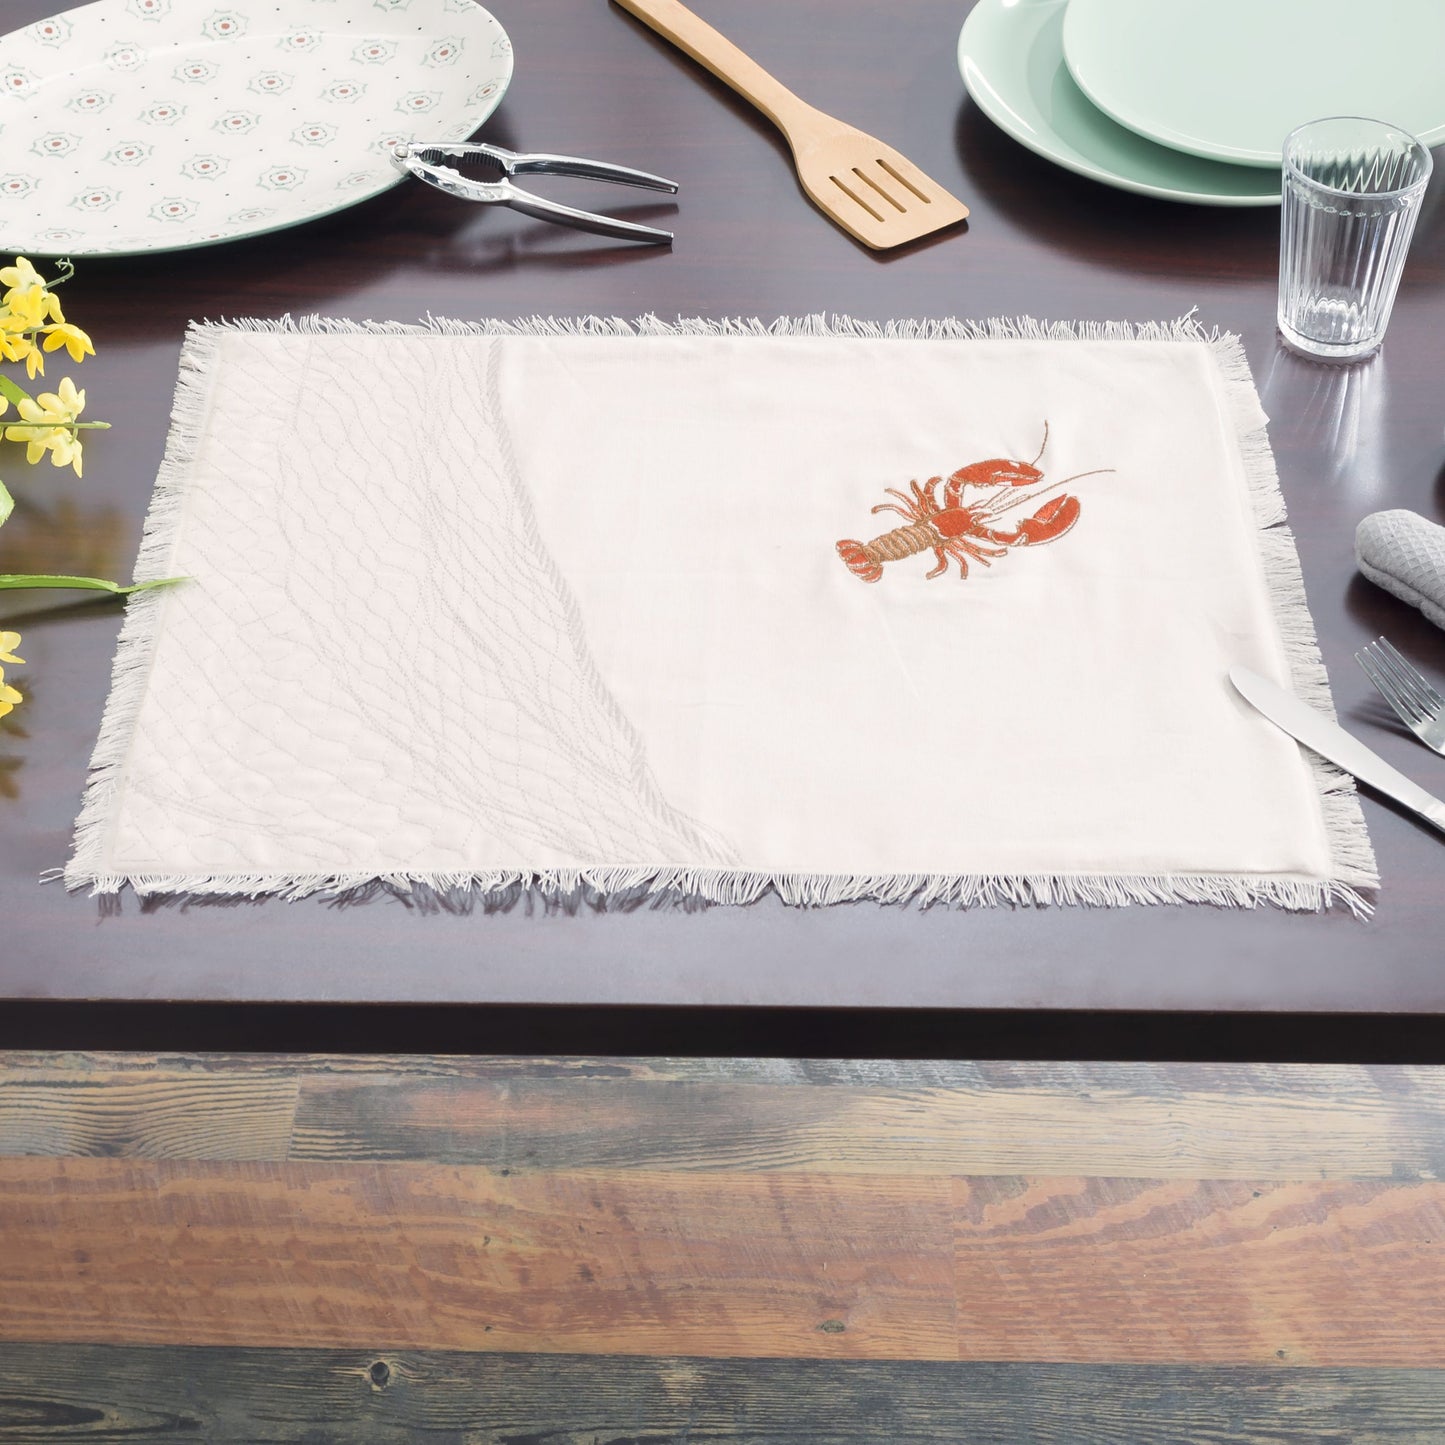 Natural fringed cotton placemat featuring embroidered red lobsters set on table with dishes.